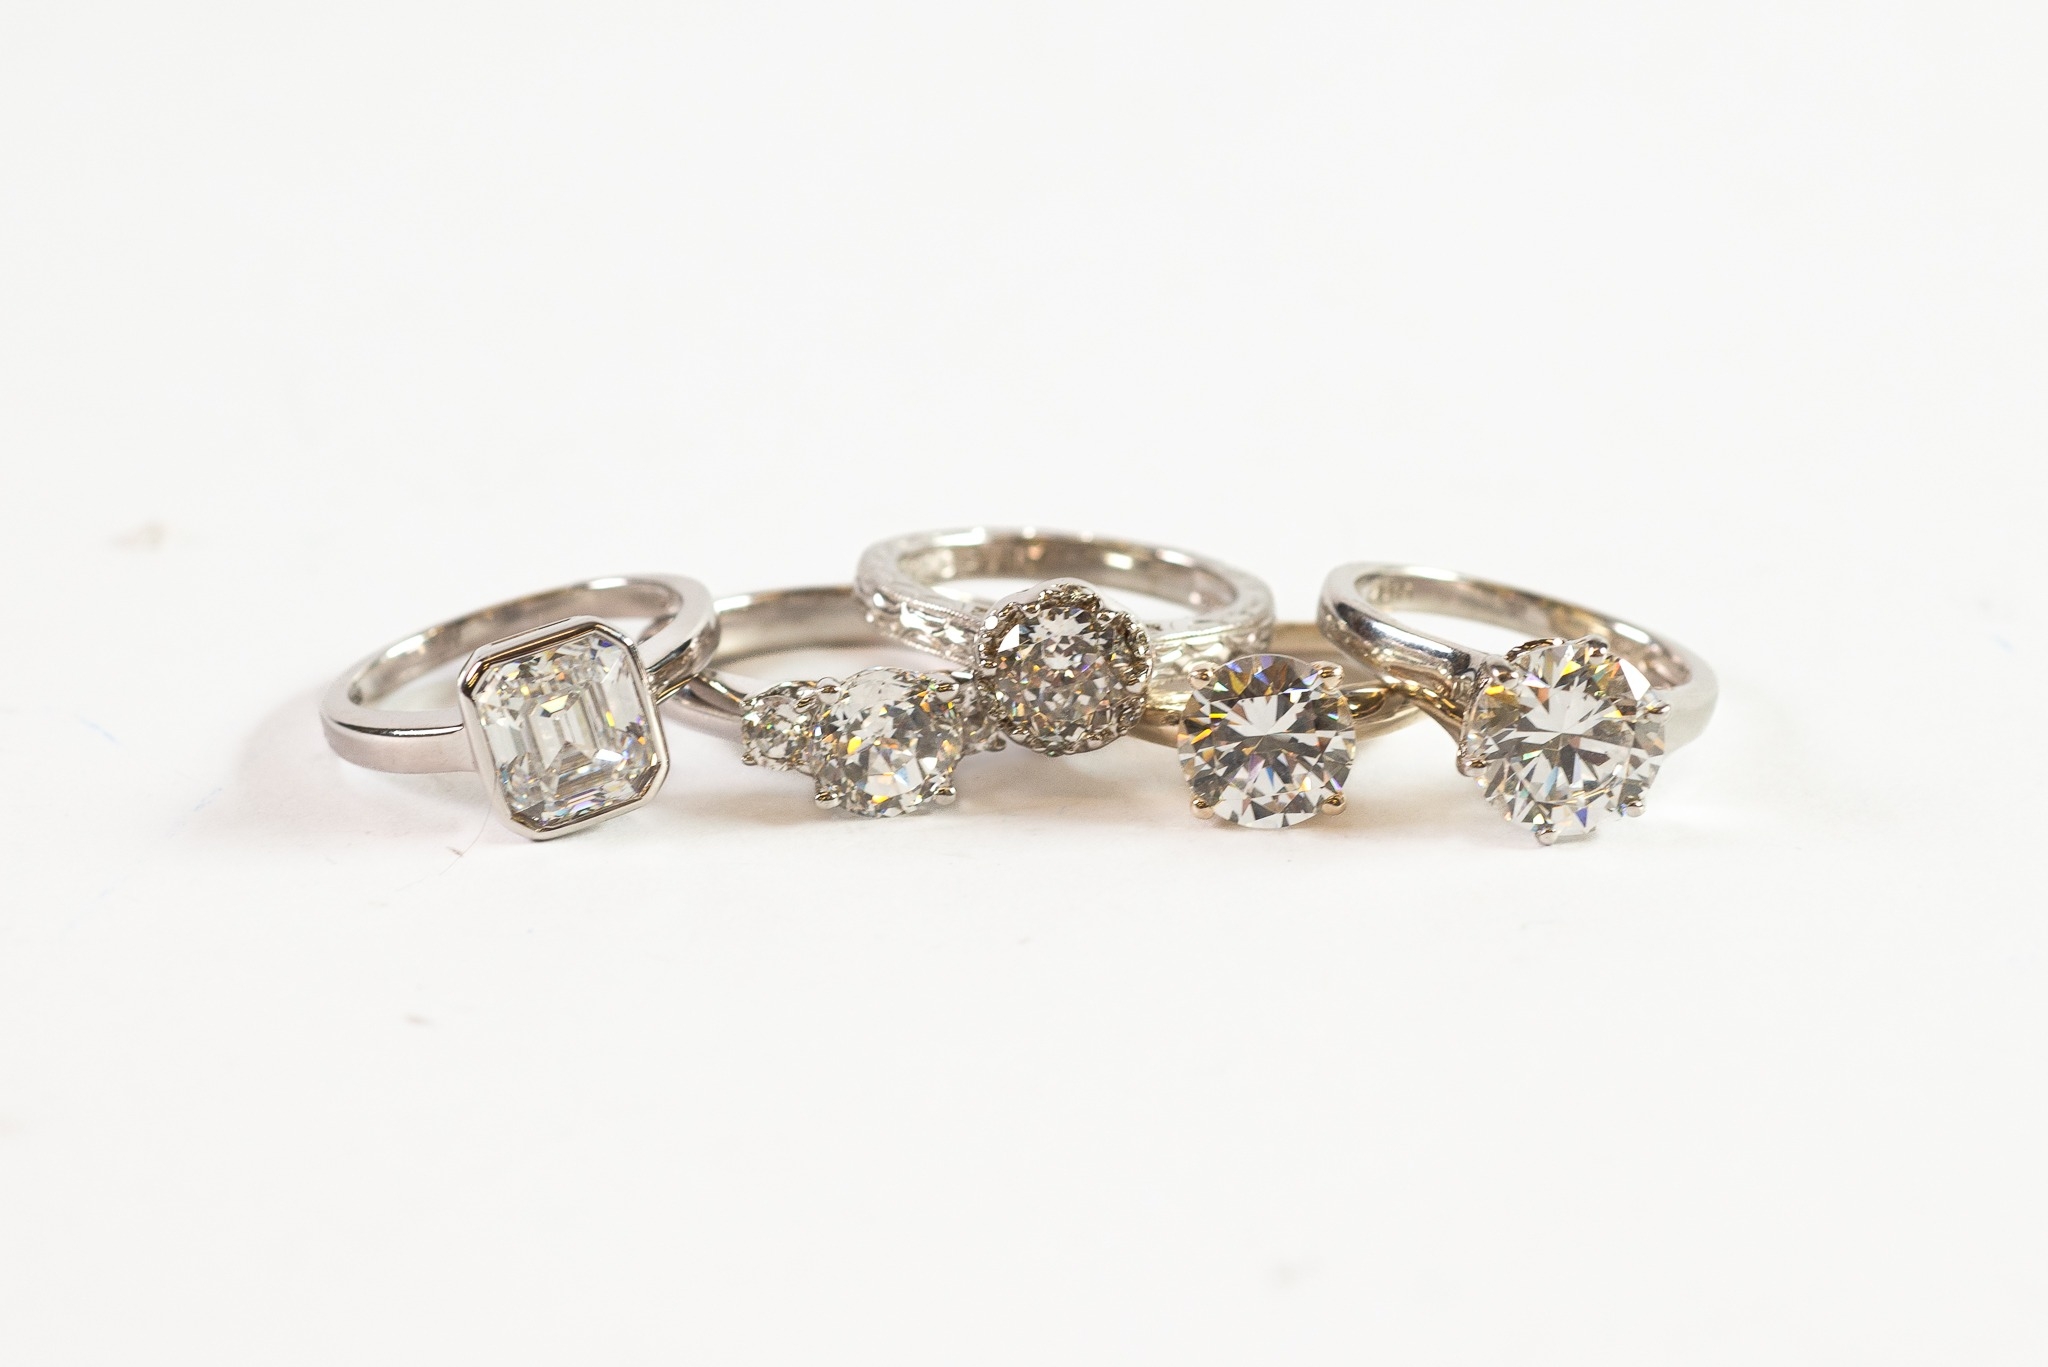 5 SILVER AND CZ SOLITAIRE-STYLE RINGS (5)